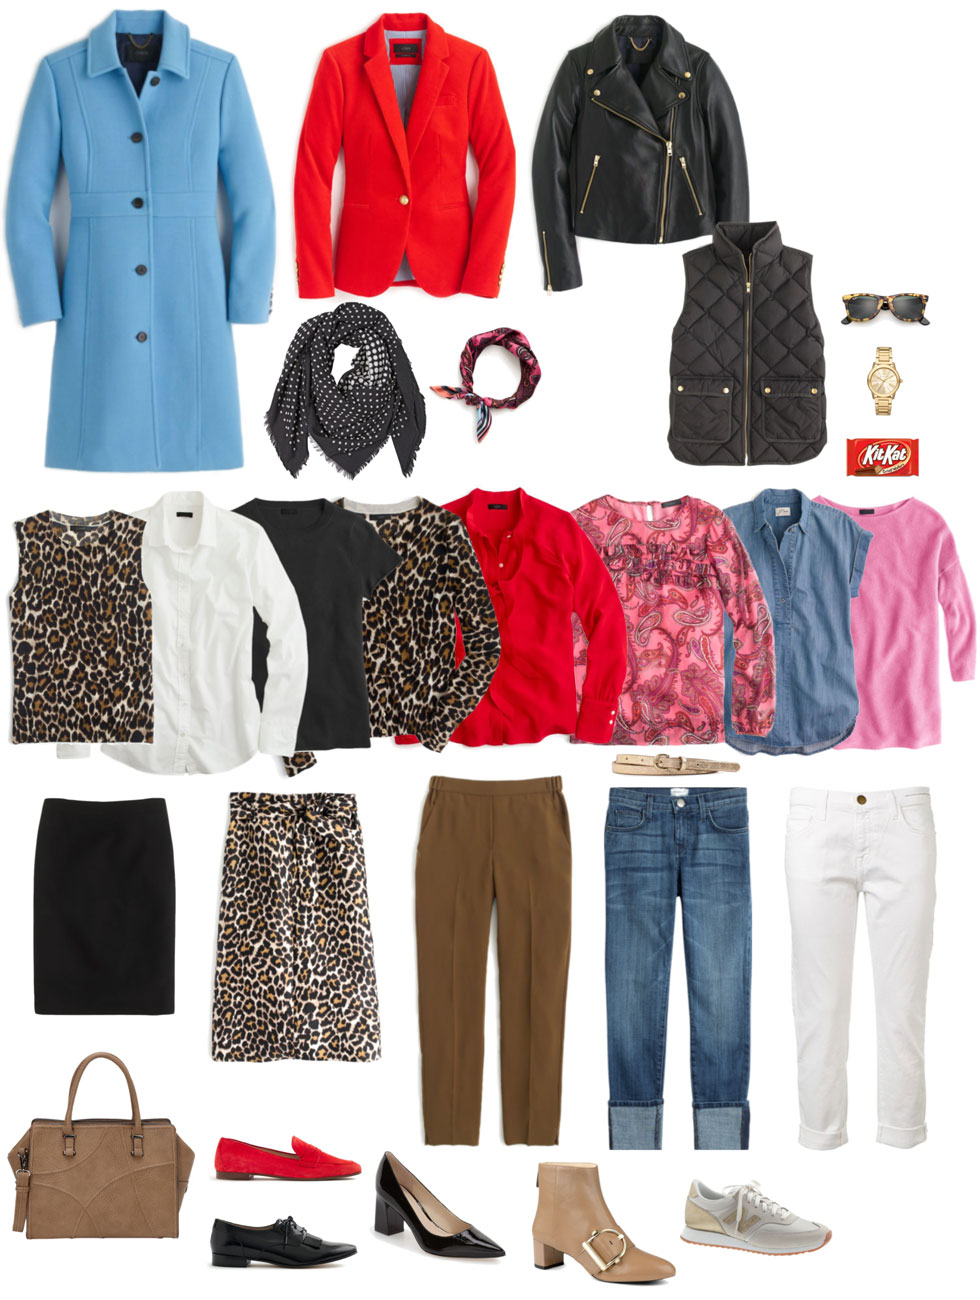 Ensemble Style Advice - A Mix-and-Match Capsule for Fall